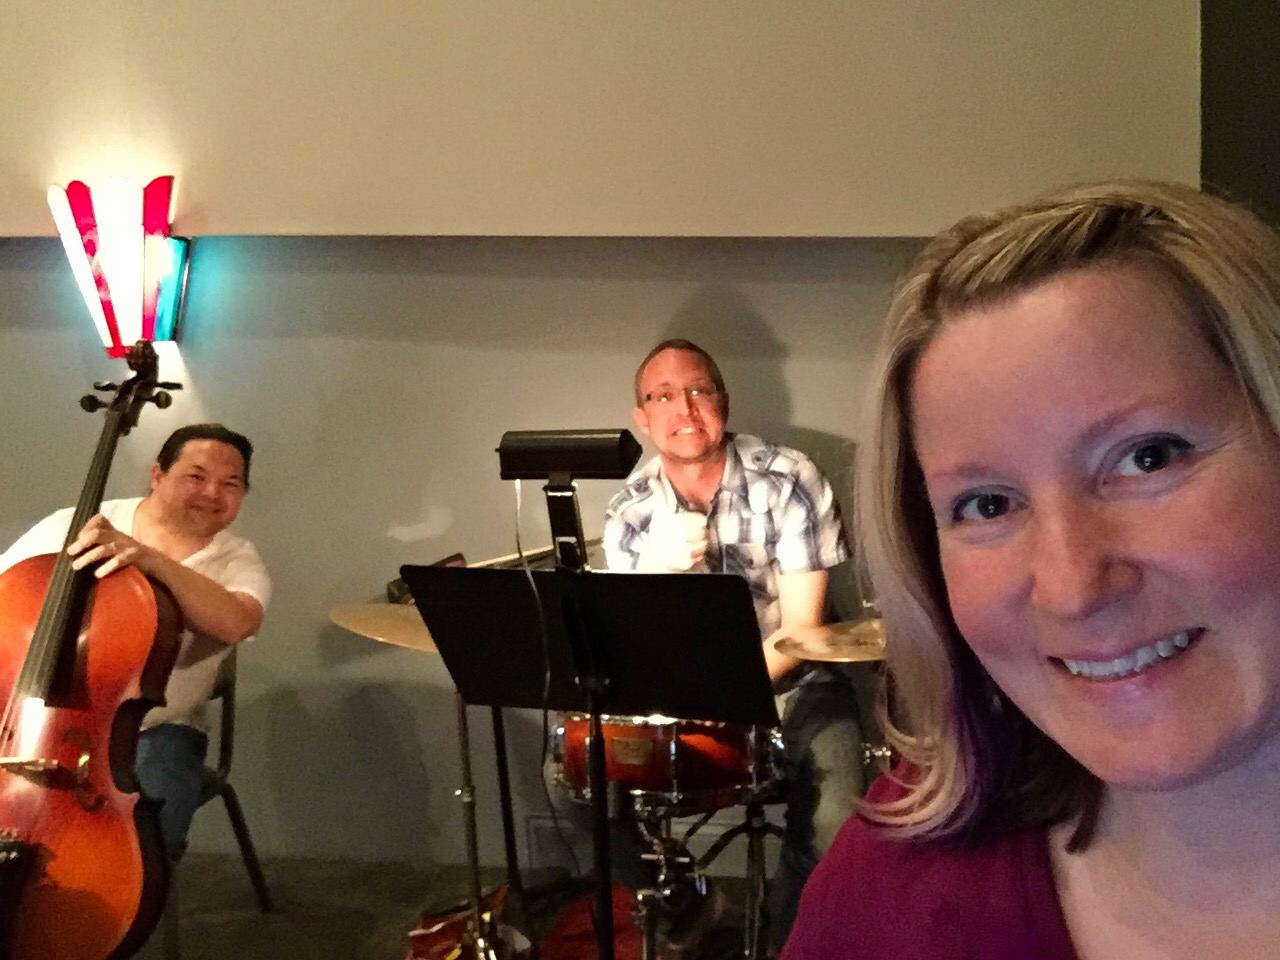 Tech rehearsal for "Clue" at the Bellevue Society for the Arts, with Nathan on cello, Rob Ciesluk on percussion, and musical director Kristen Santos on piano.